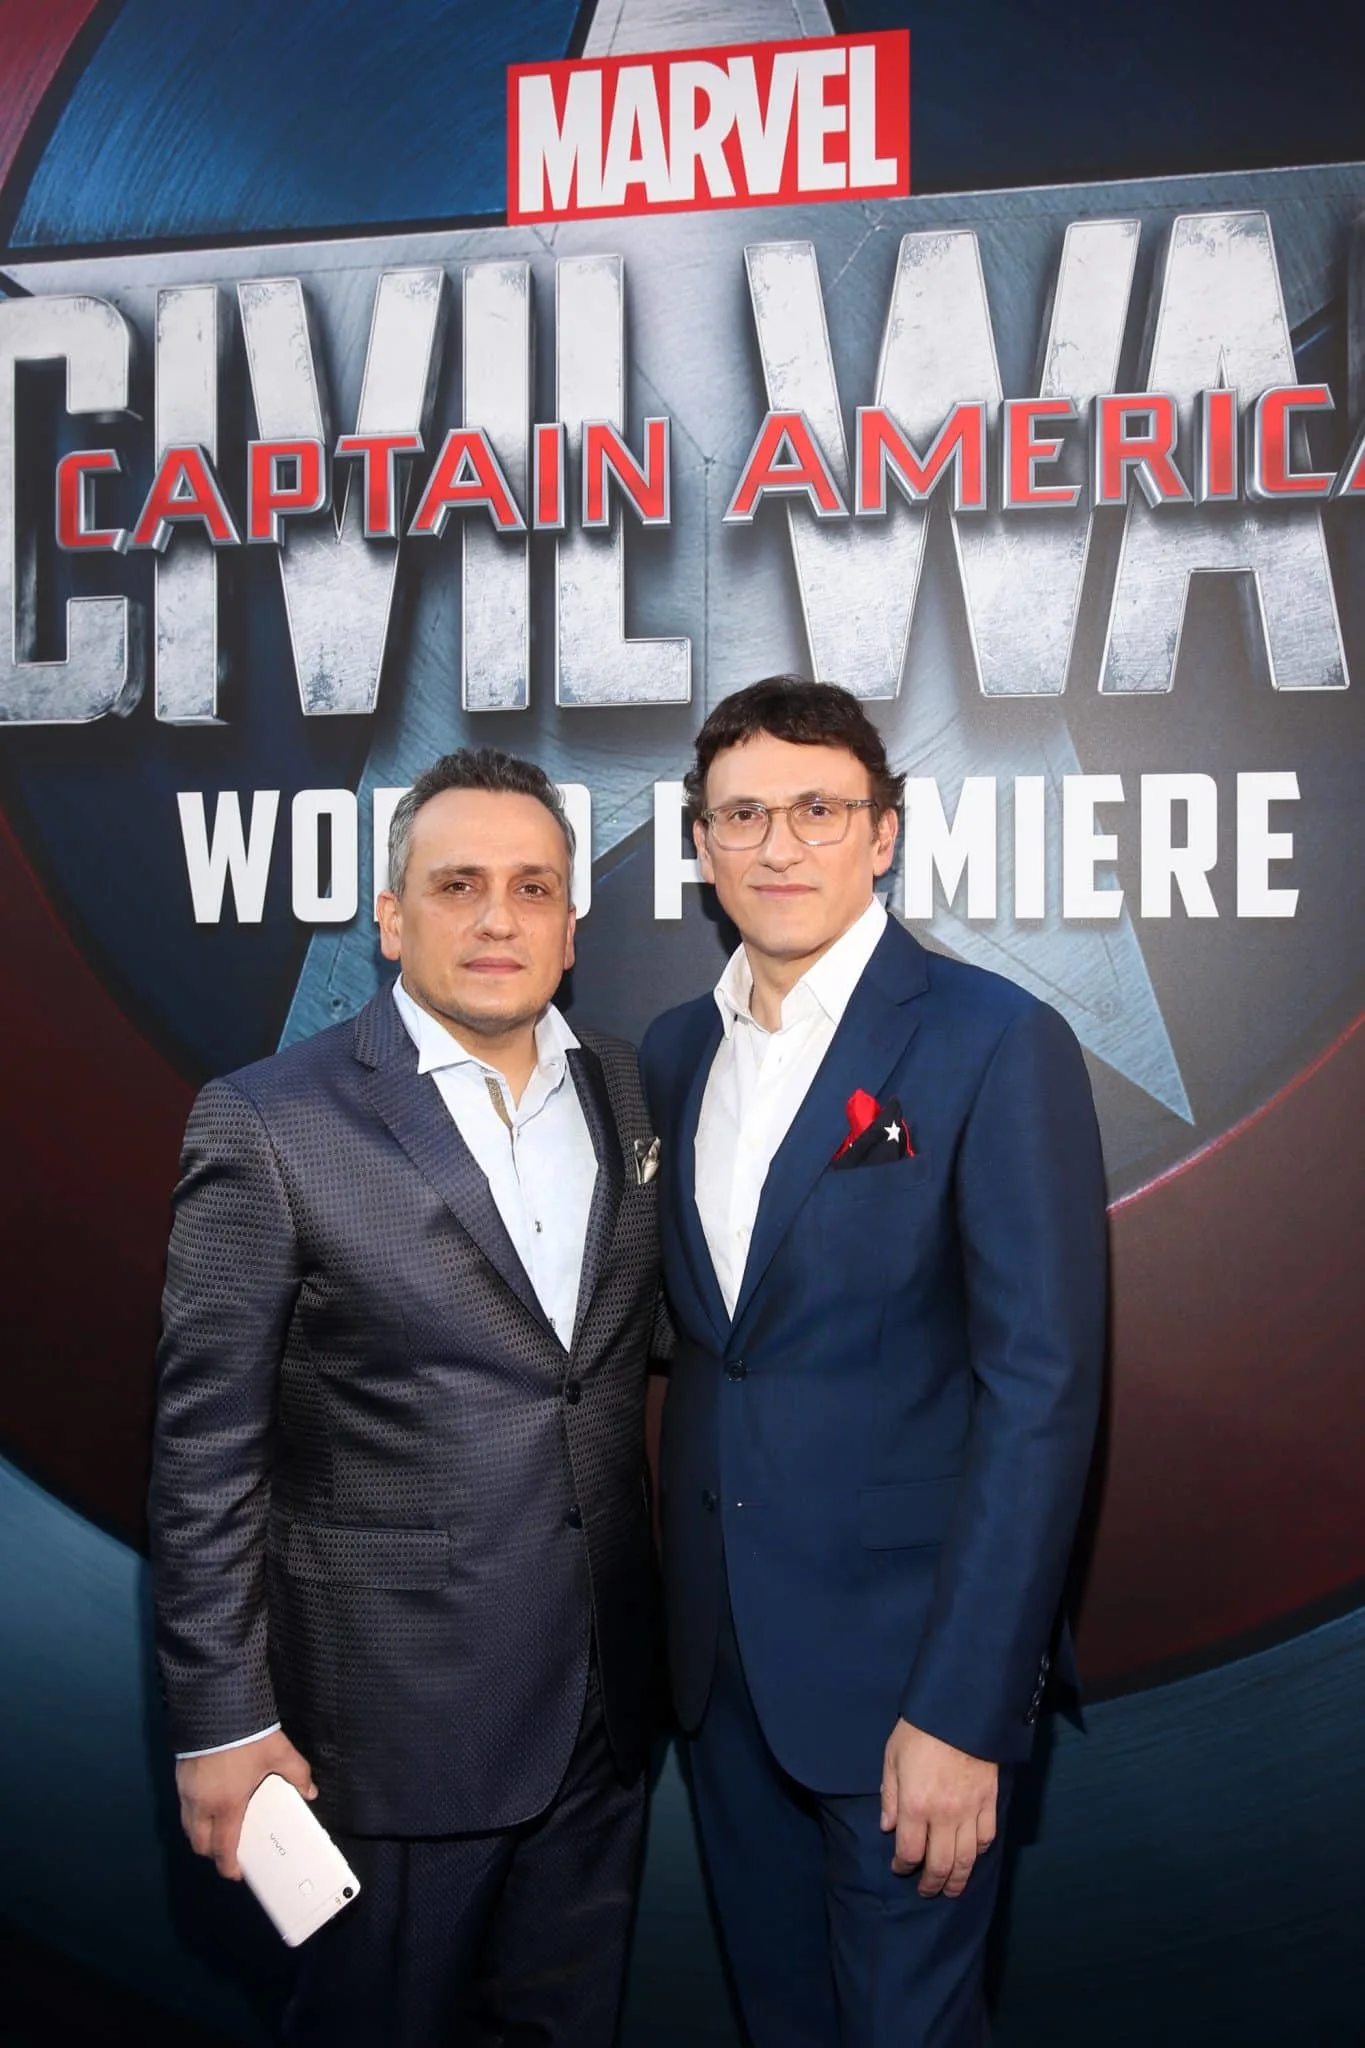 HOLLYWOOD, CALIFORNIA - APRIL 12: Directors Joe Russo (L) and Anthony Russo attend The World Premiere of Marvel's "Captain America: Civil War" at Dolby Theatre on April 12, 2016 in Los Angeles, California. (Photo by Jesse Grant/Getty Images for Disney) *** Local Caption *** Joe Russo; Anthony Russo